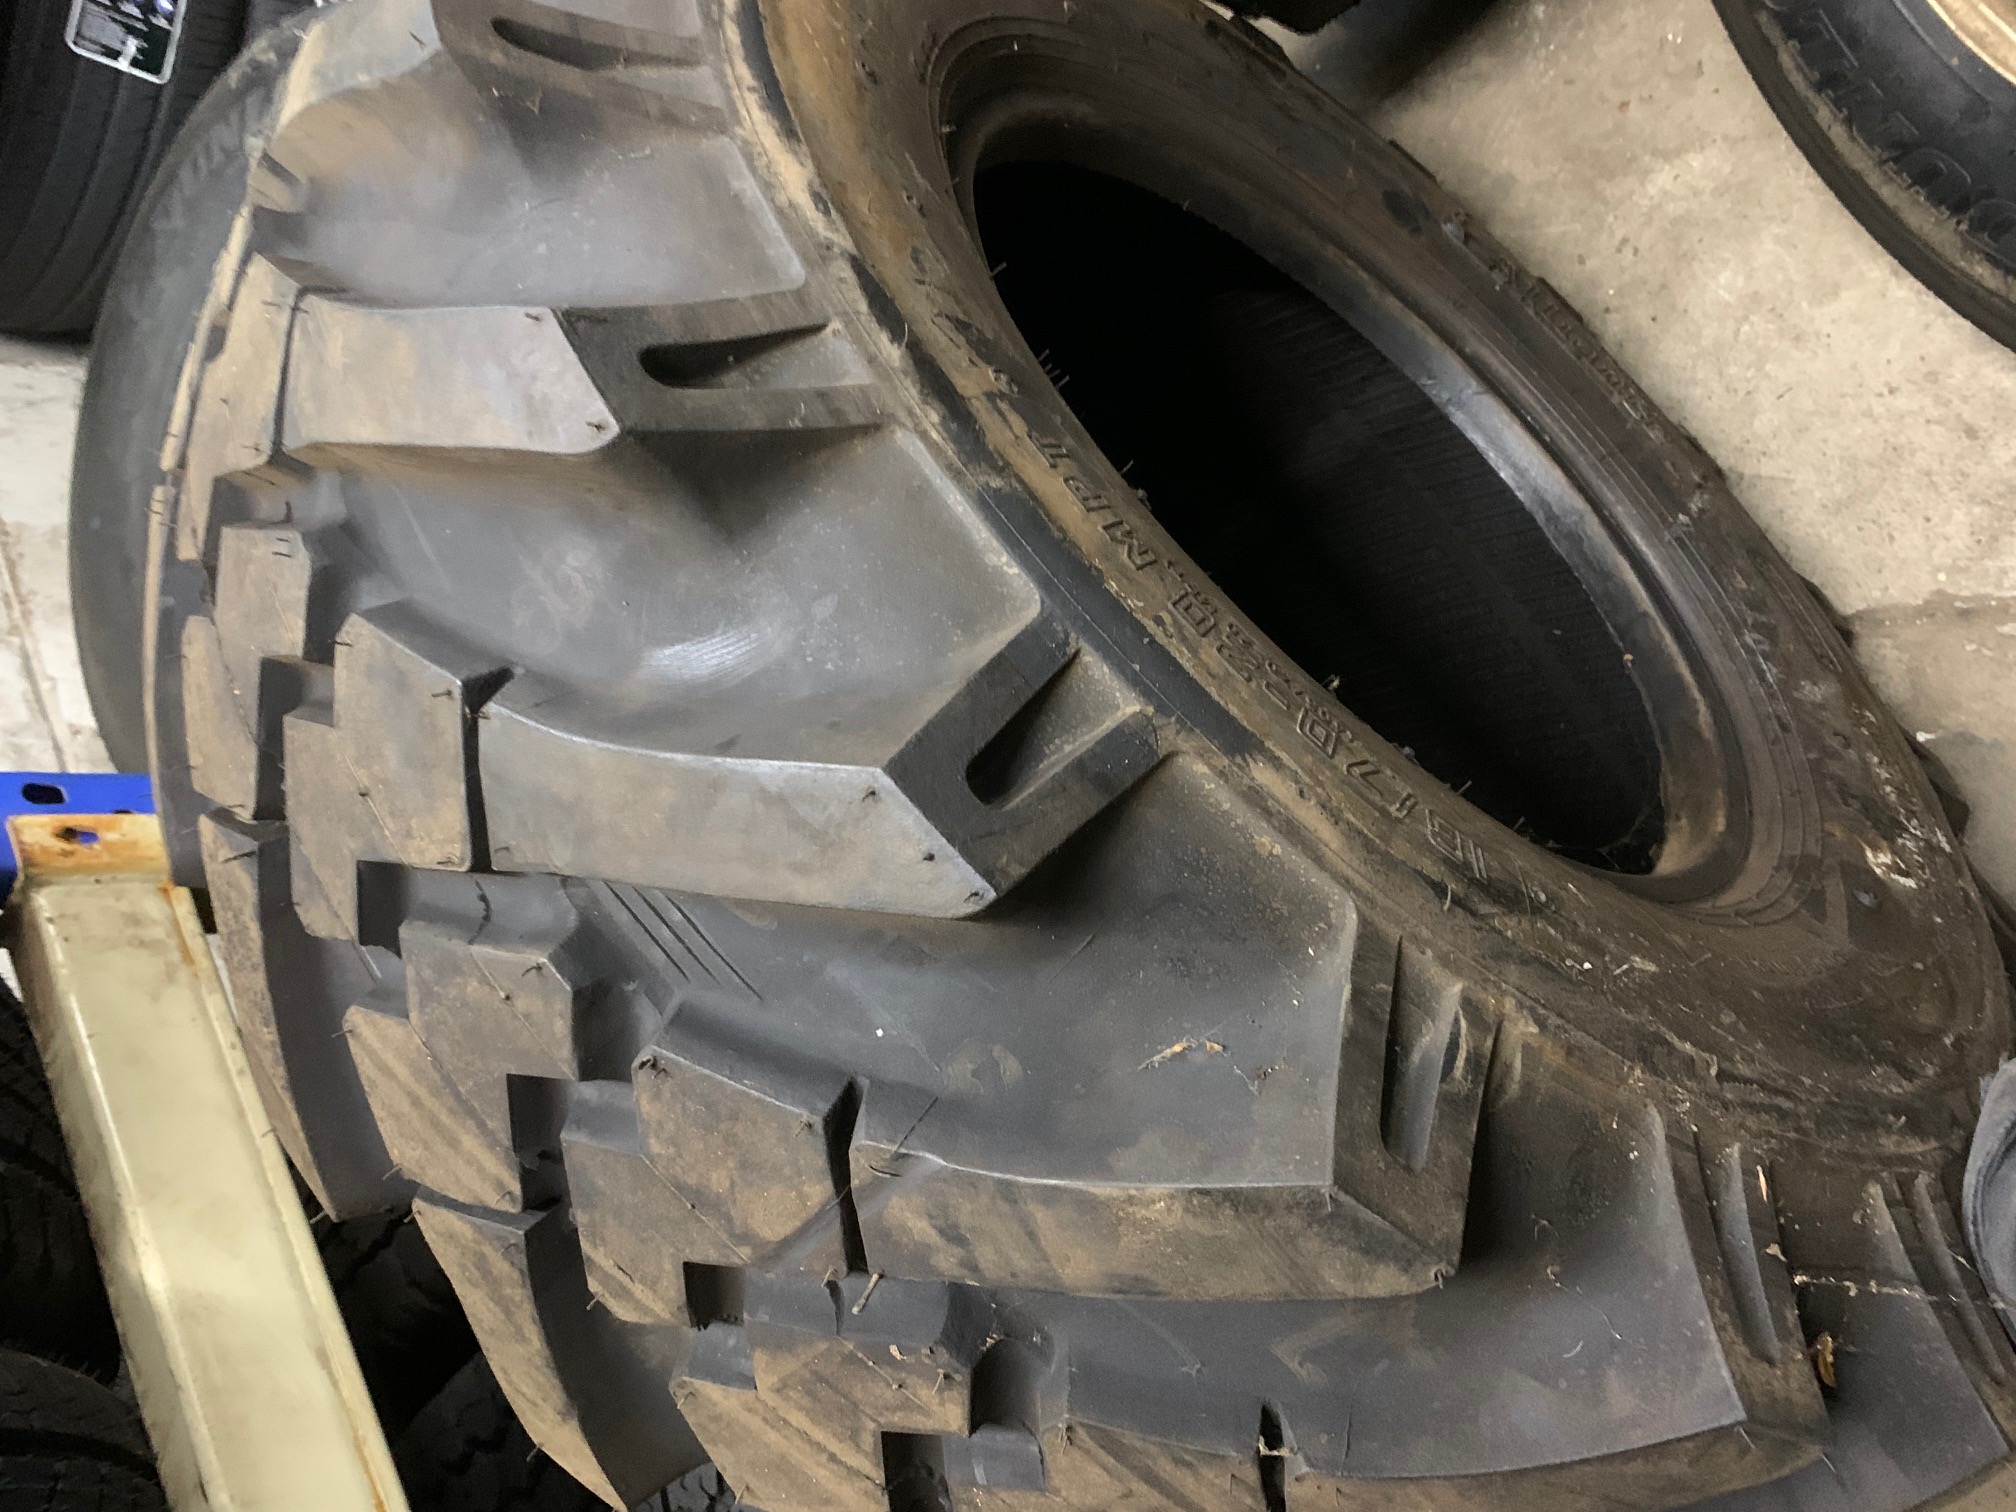 16/70-20 (405/70-20) agriculture tyre